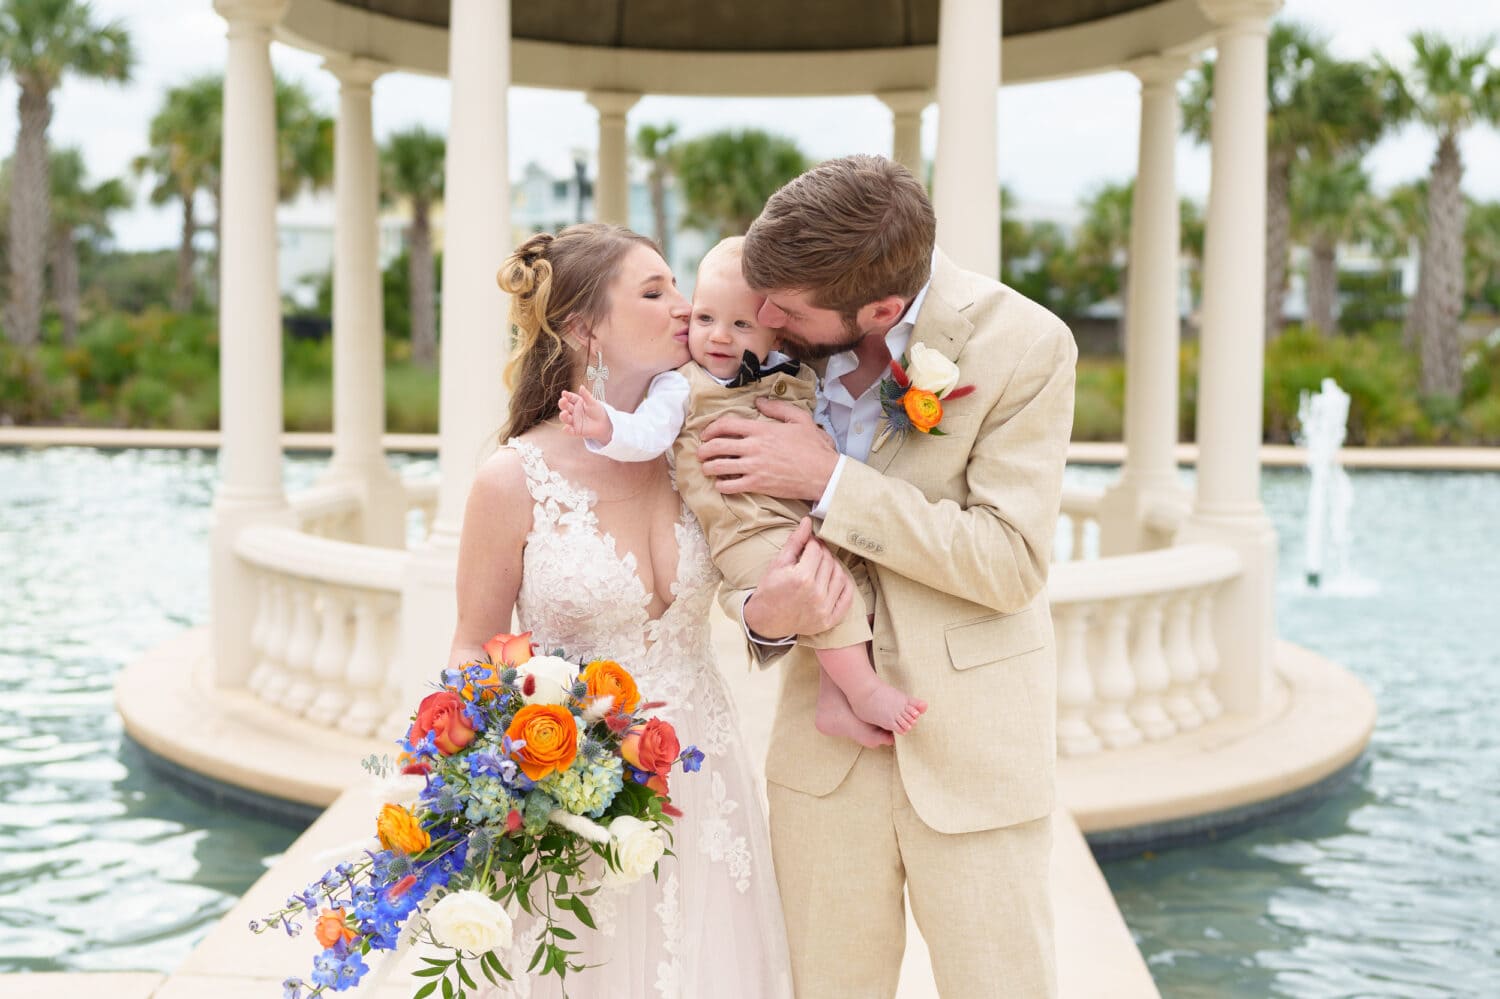 Bride and groom with their happy baby boy - 21 Main Events - North Myrtle Beach